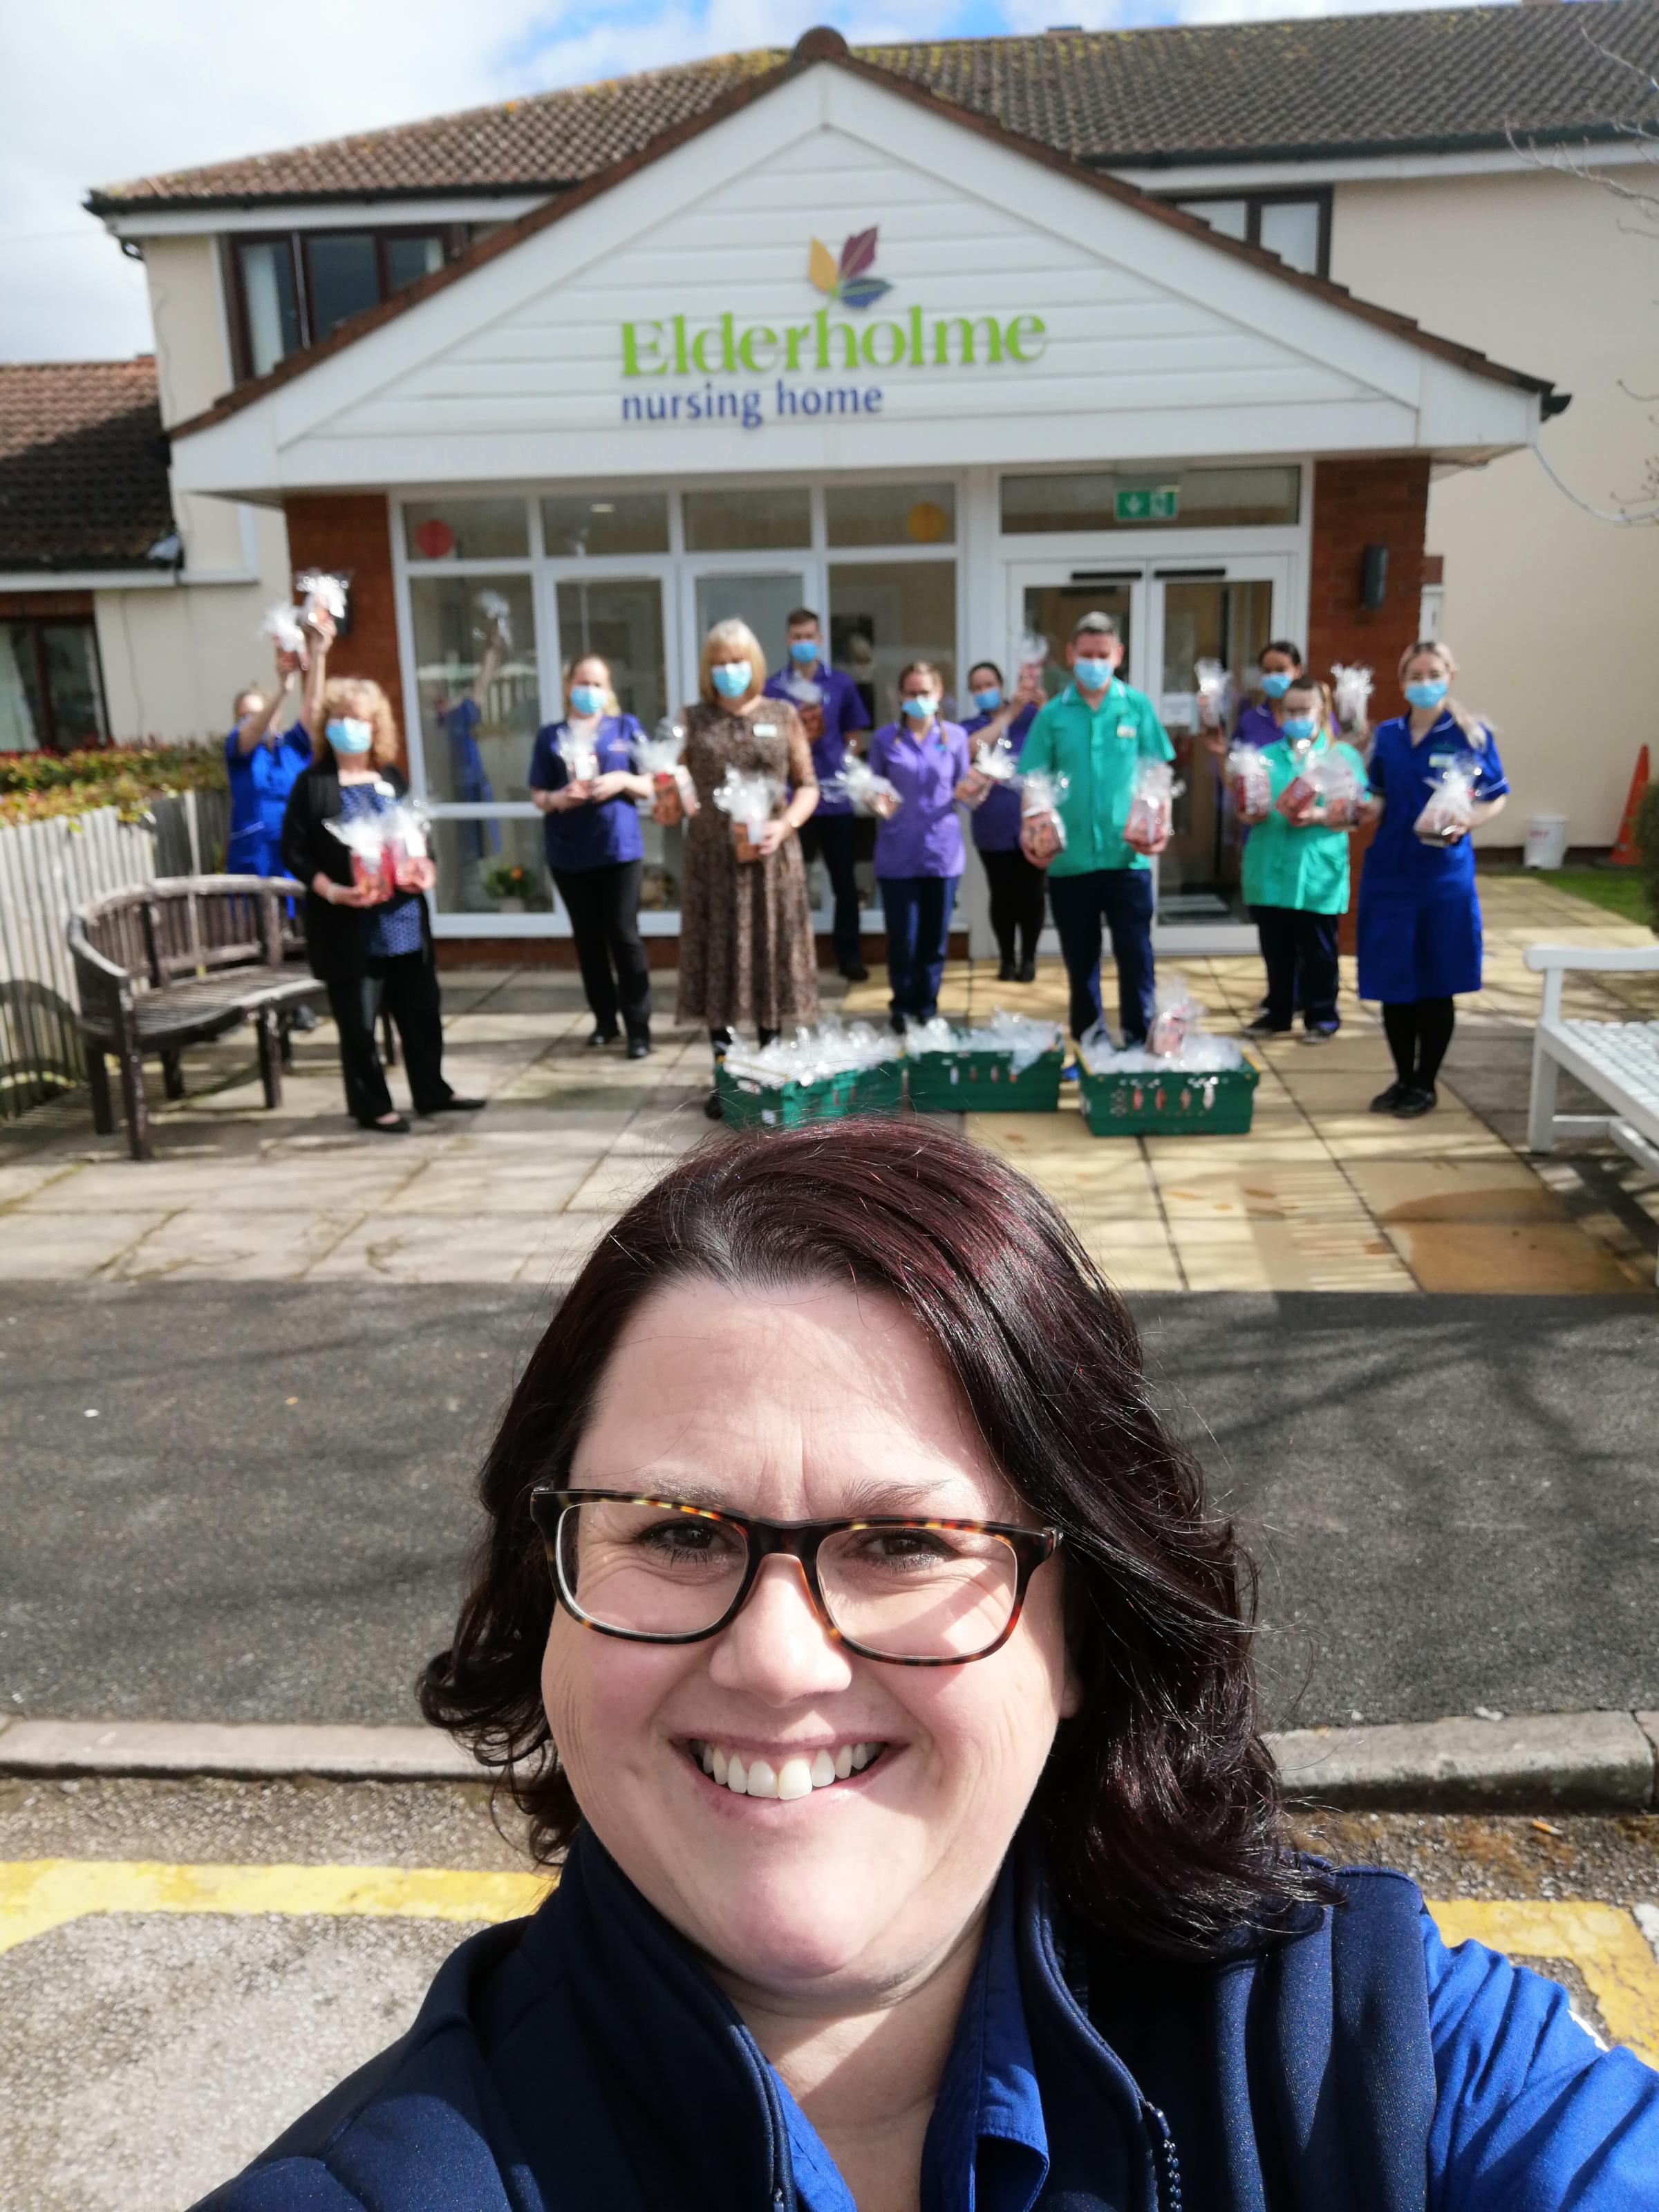 Easter eggs being dropped off at care home